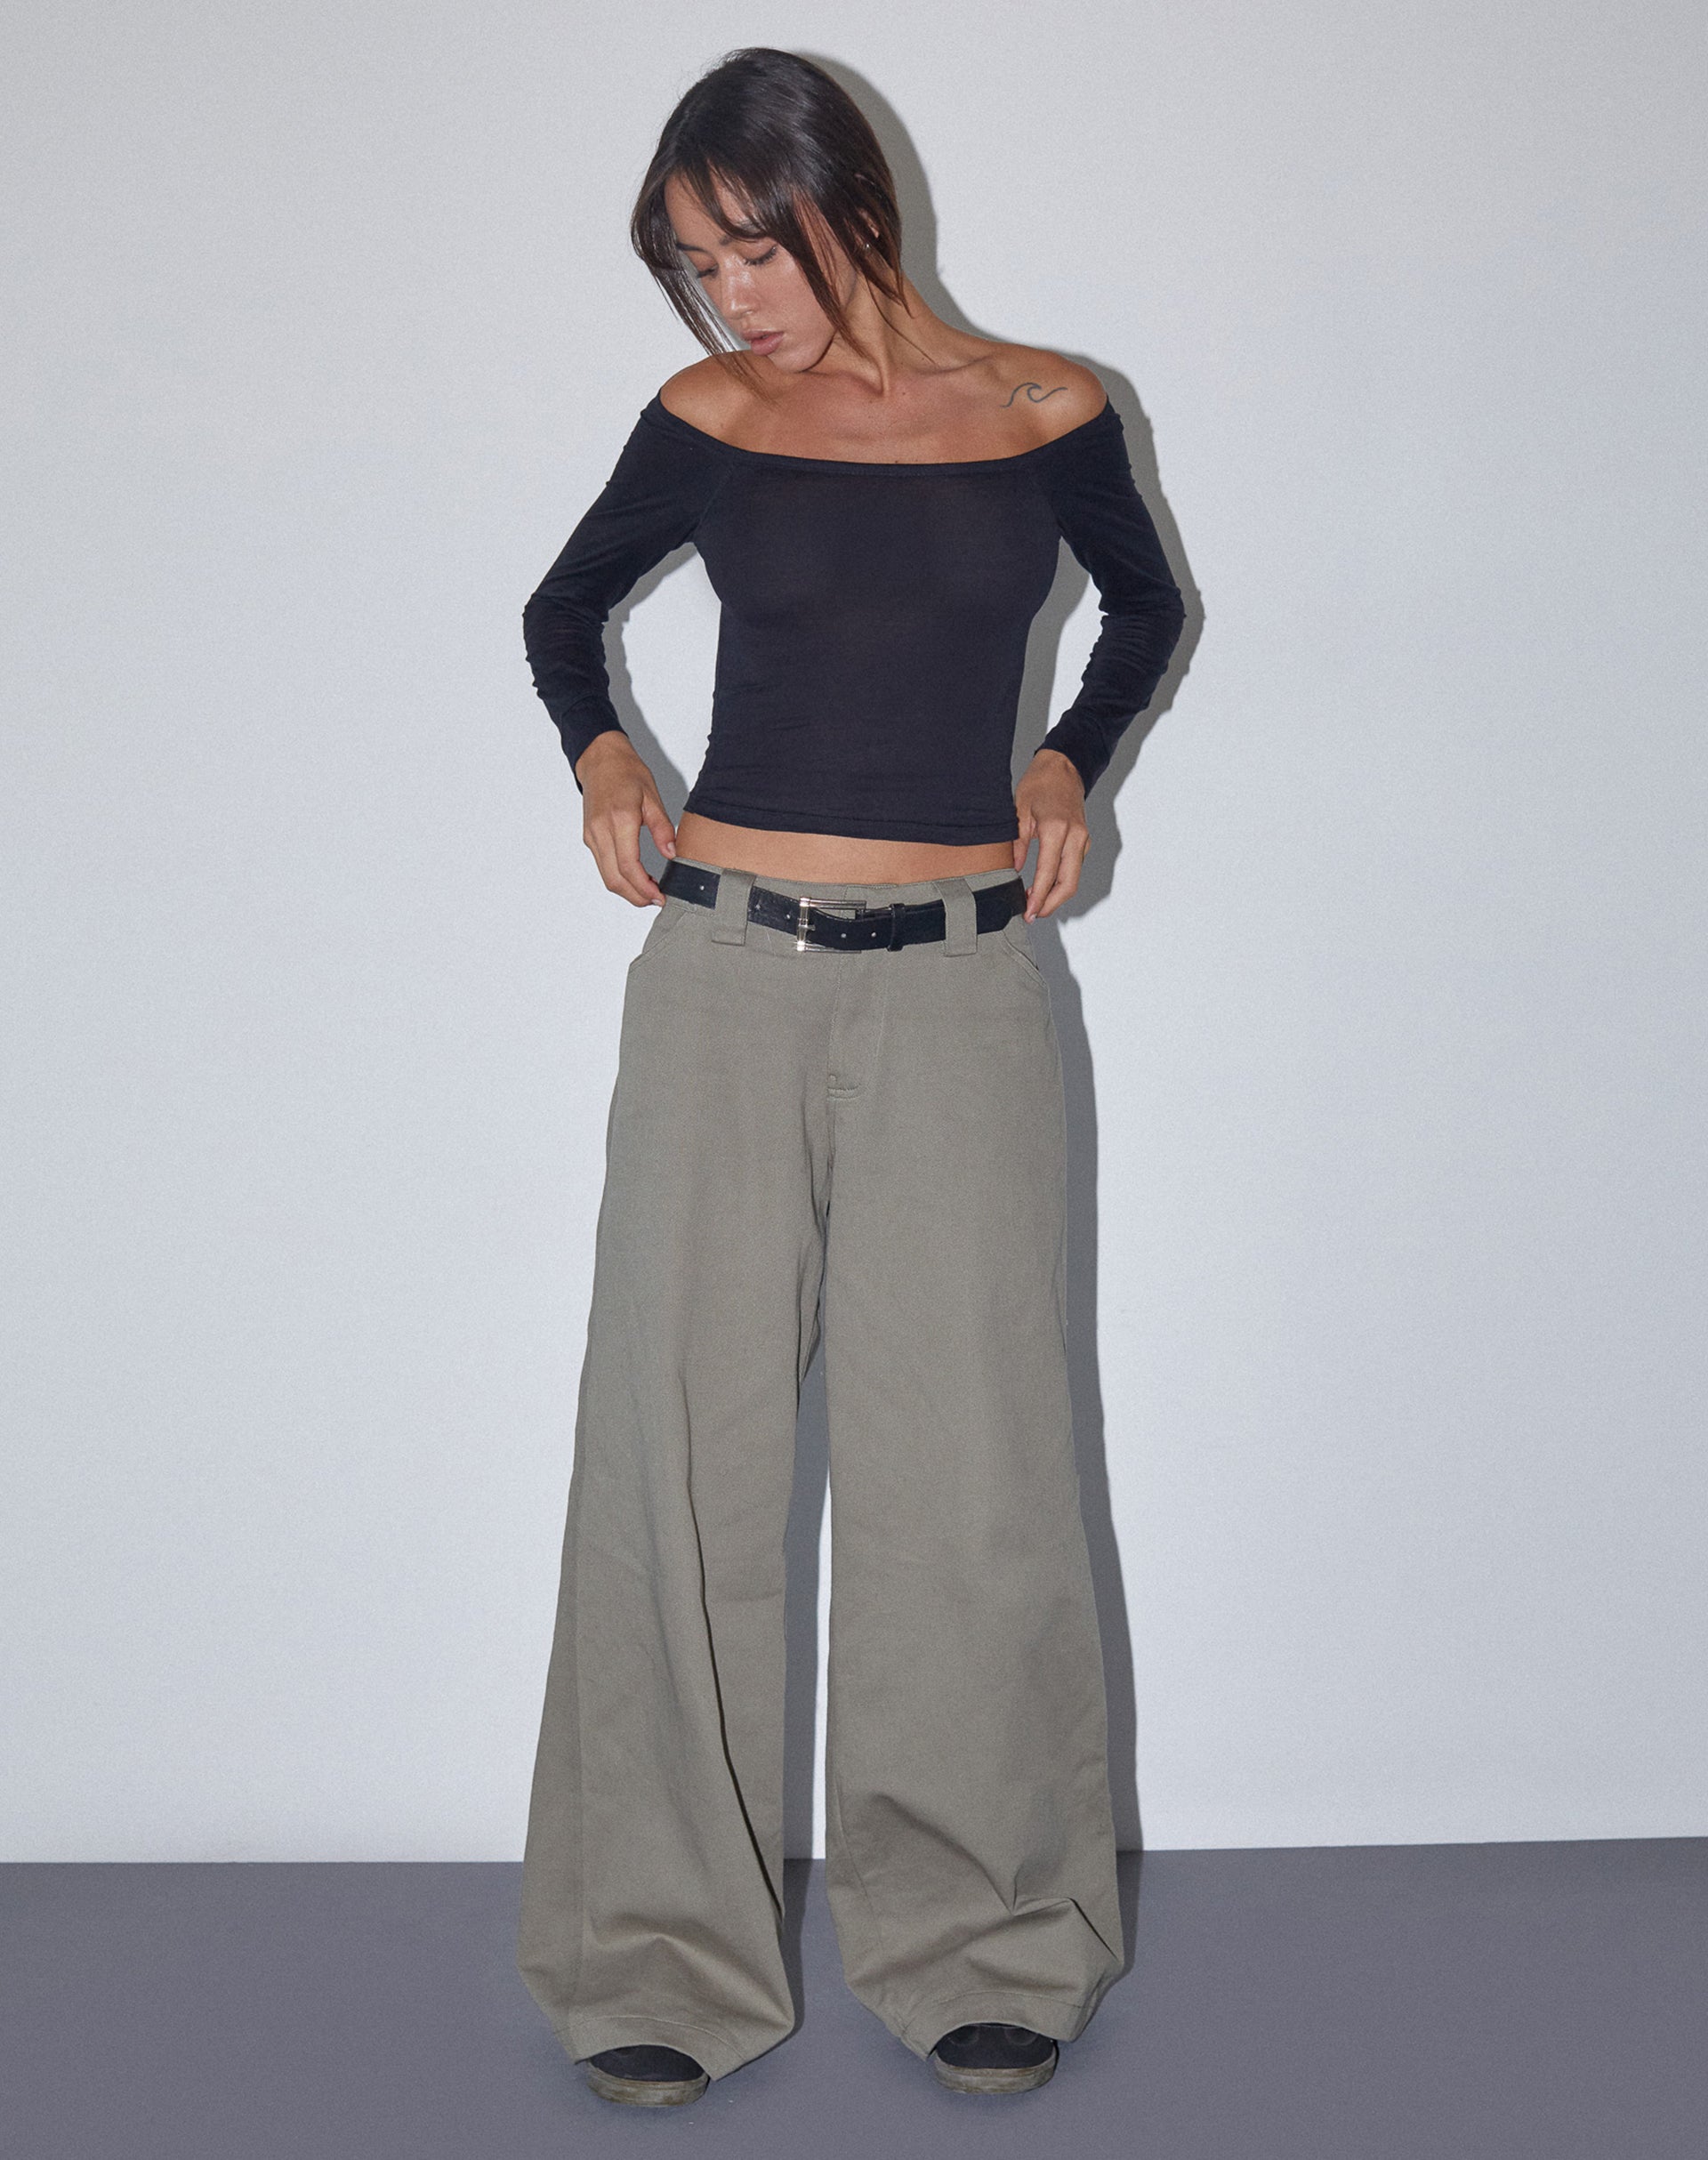 Buy MOOMAYA Women's Solid Palazzo Pants High Waist Ankle Length Wide Leg  Trousers | Shoppers Stop